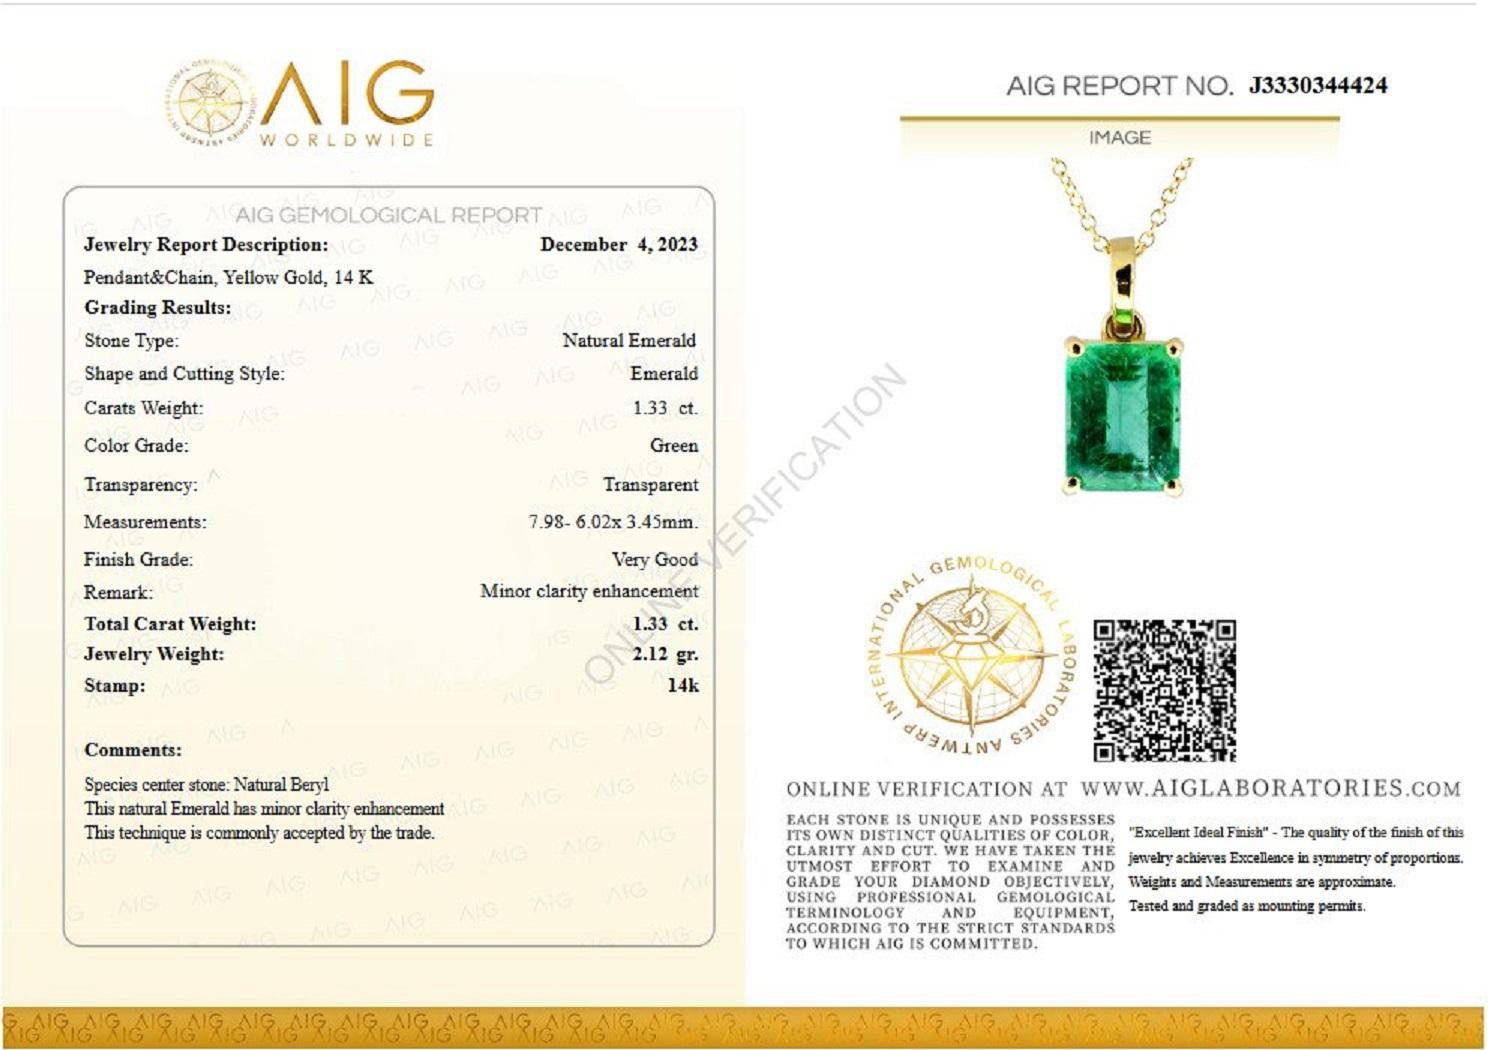 Don't miss your chance to own this unique and exquisite pendant necklace of top quality Emerald.

Center Emerald Stone:
Weight: 1.23 ct
Color: Green
Shape: Pear Mixed Cut
CE(Oil): Moderate

Side Stones:
0.15 cttw, G-K, SI1-SI3 Natural